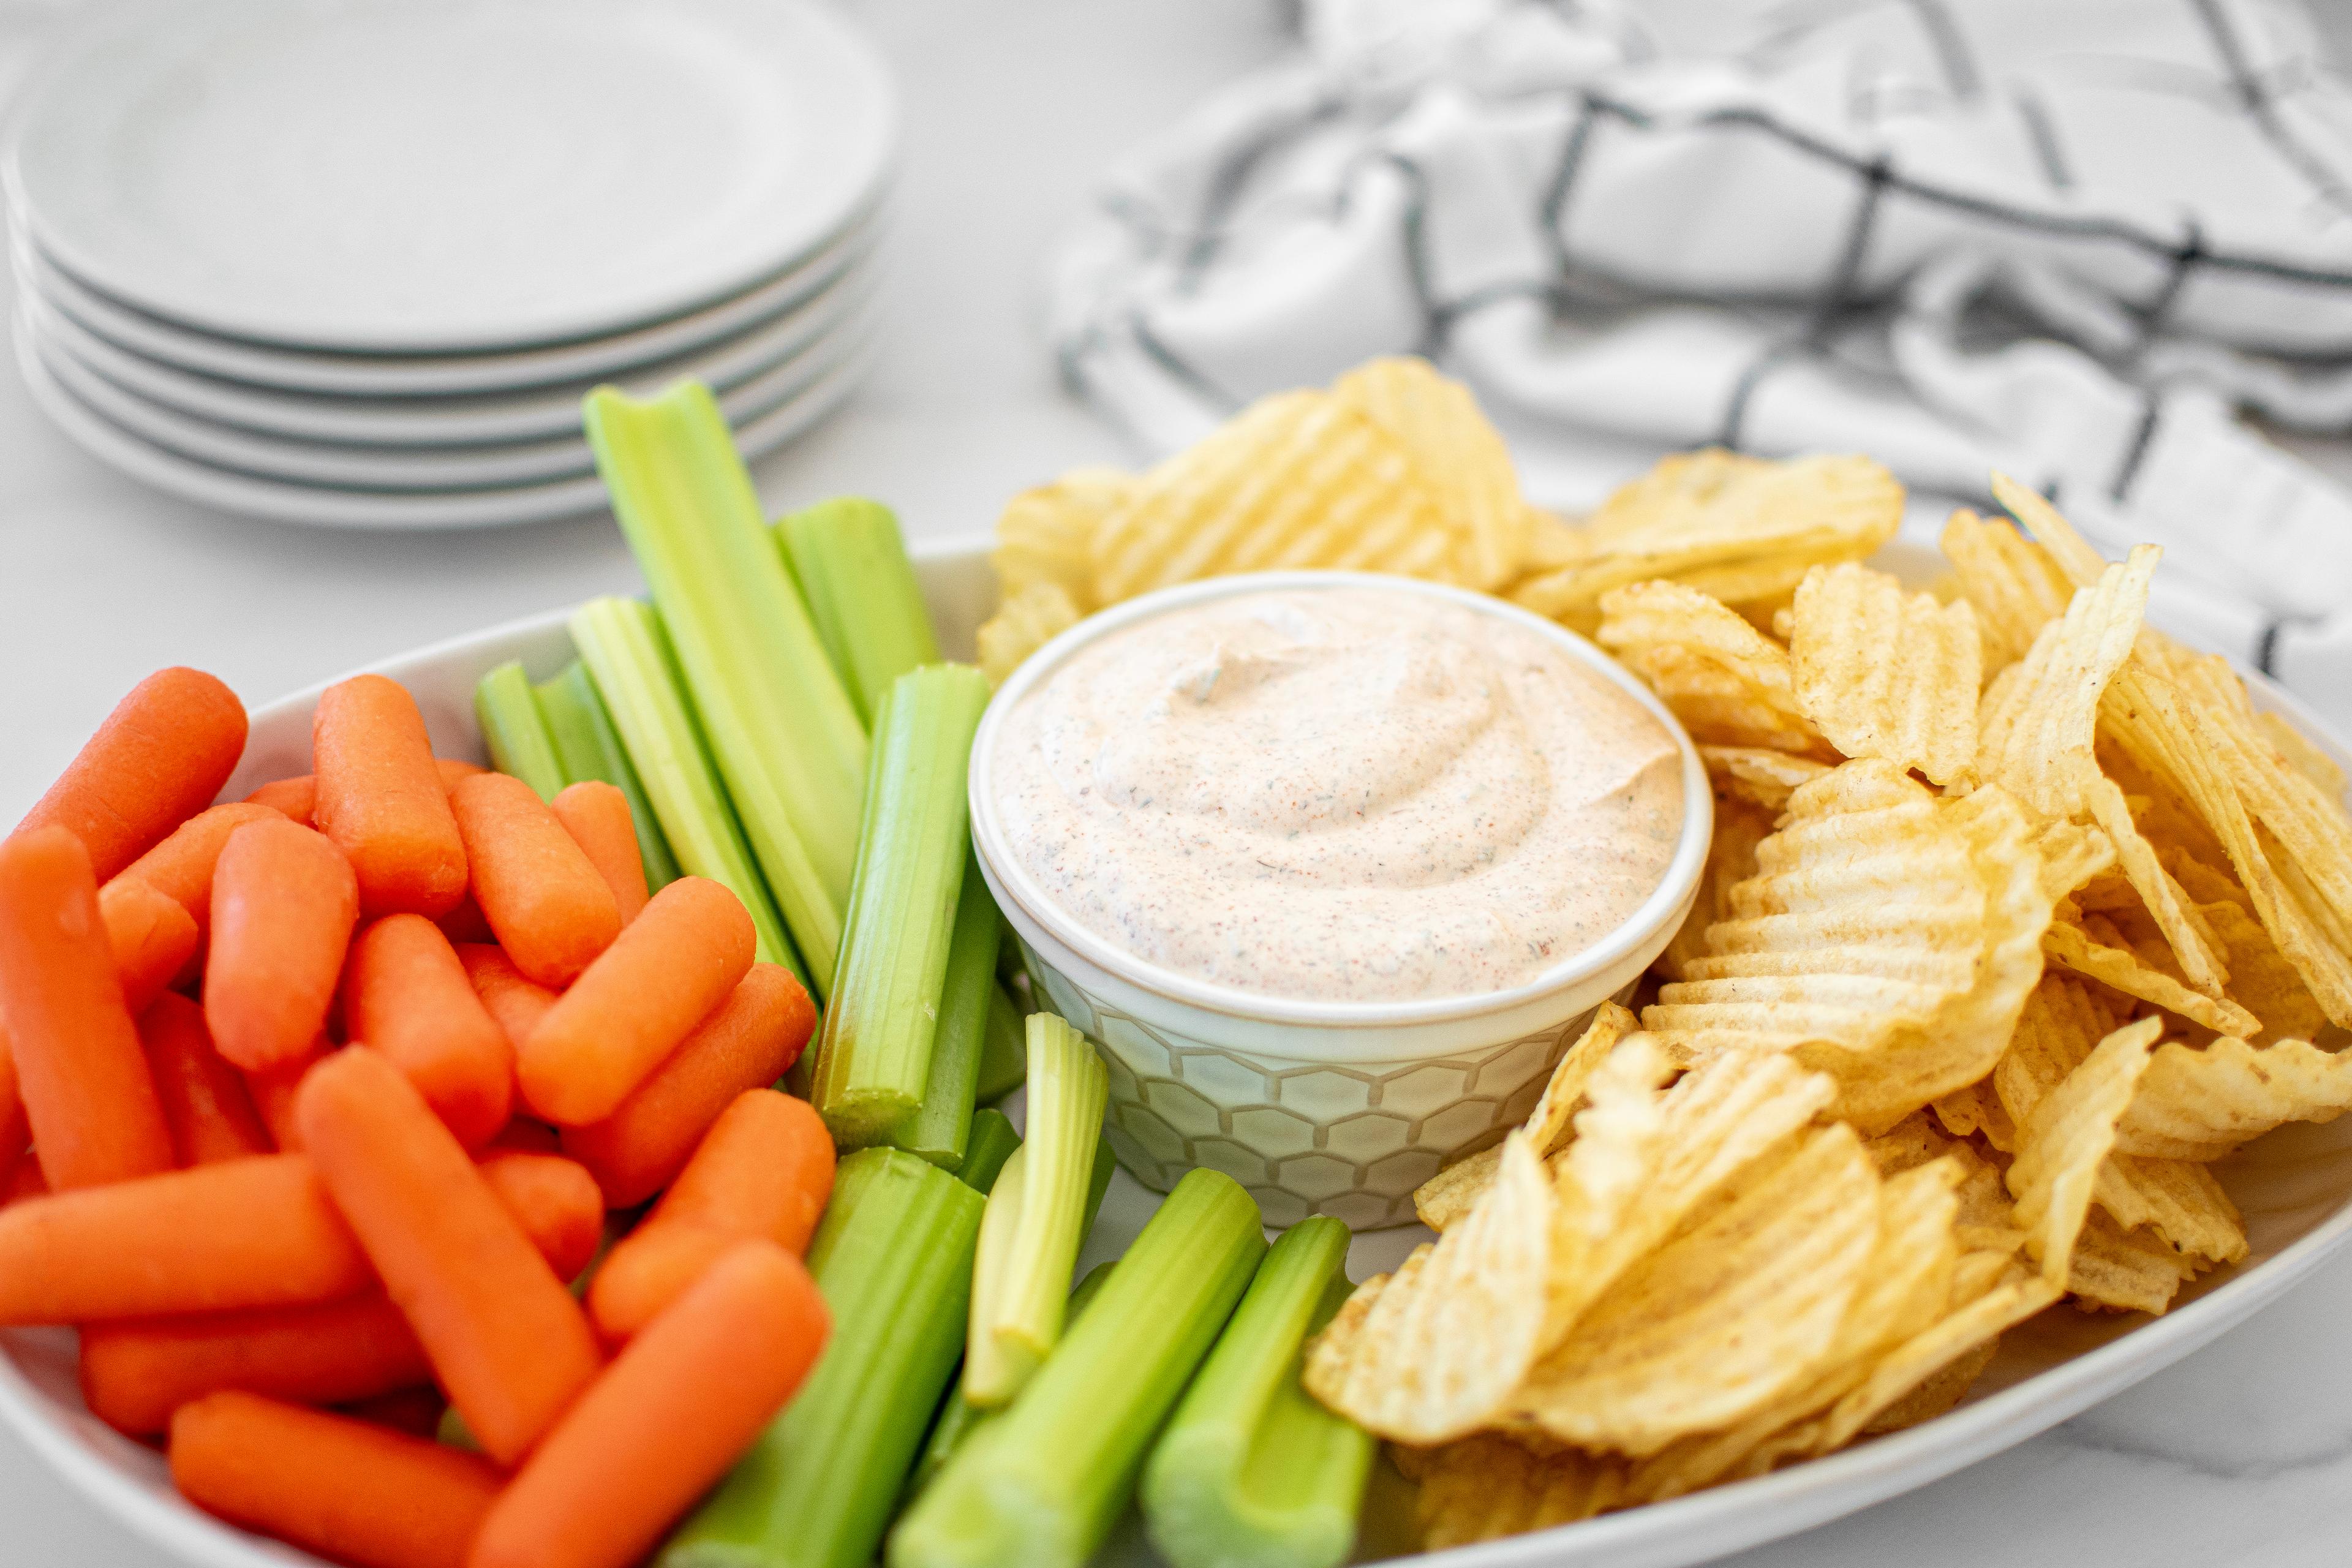 Buffalo Ranch Dip with chips, celery and carrots on a serving dish.